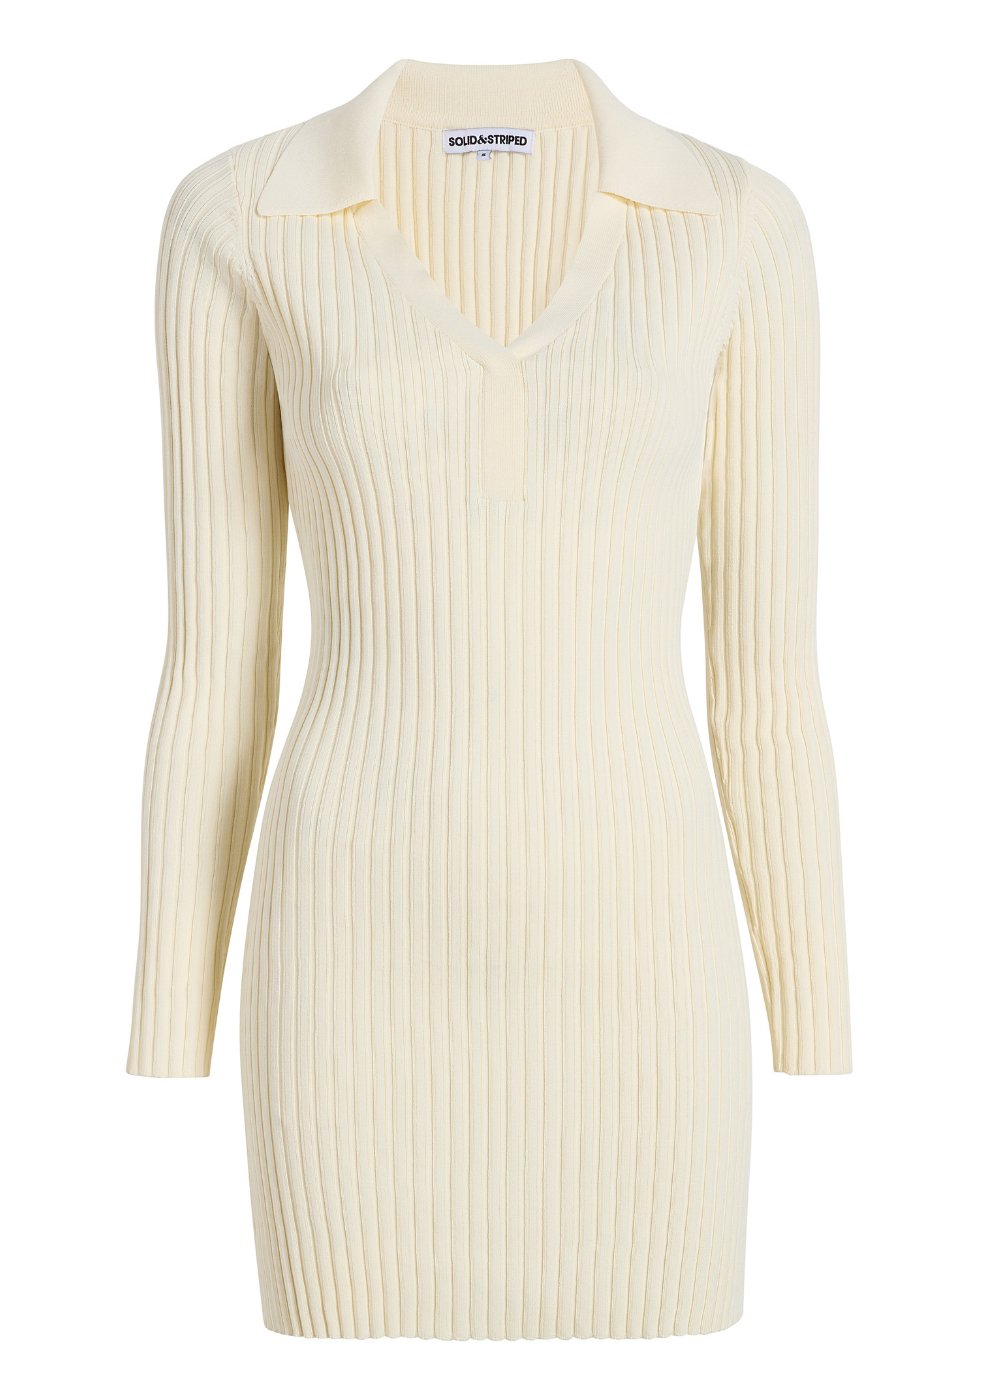 The Geena Dress - Solid & Striped